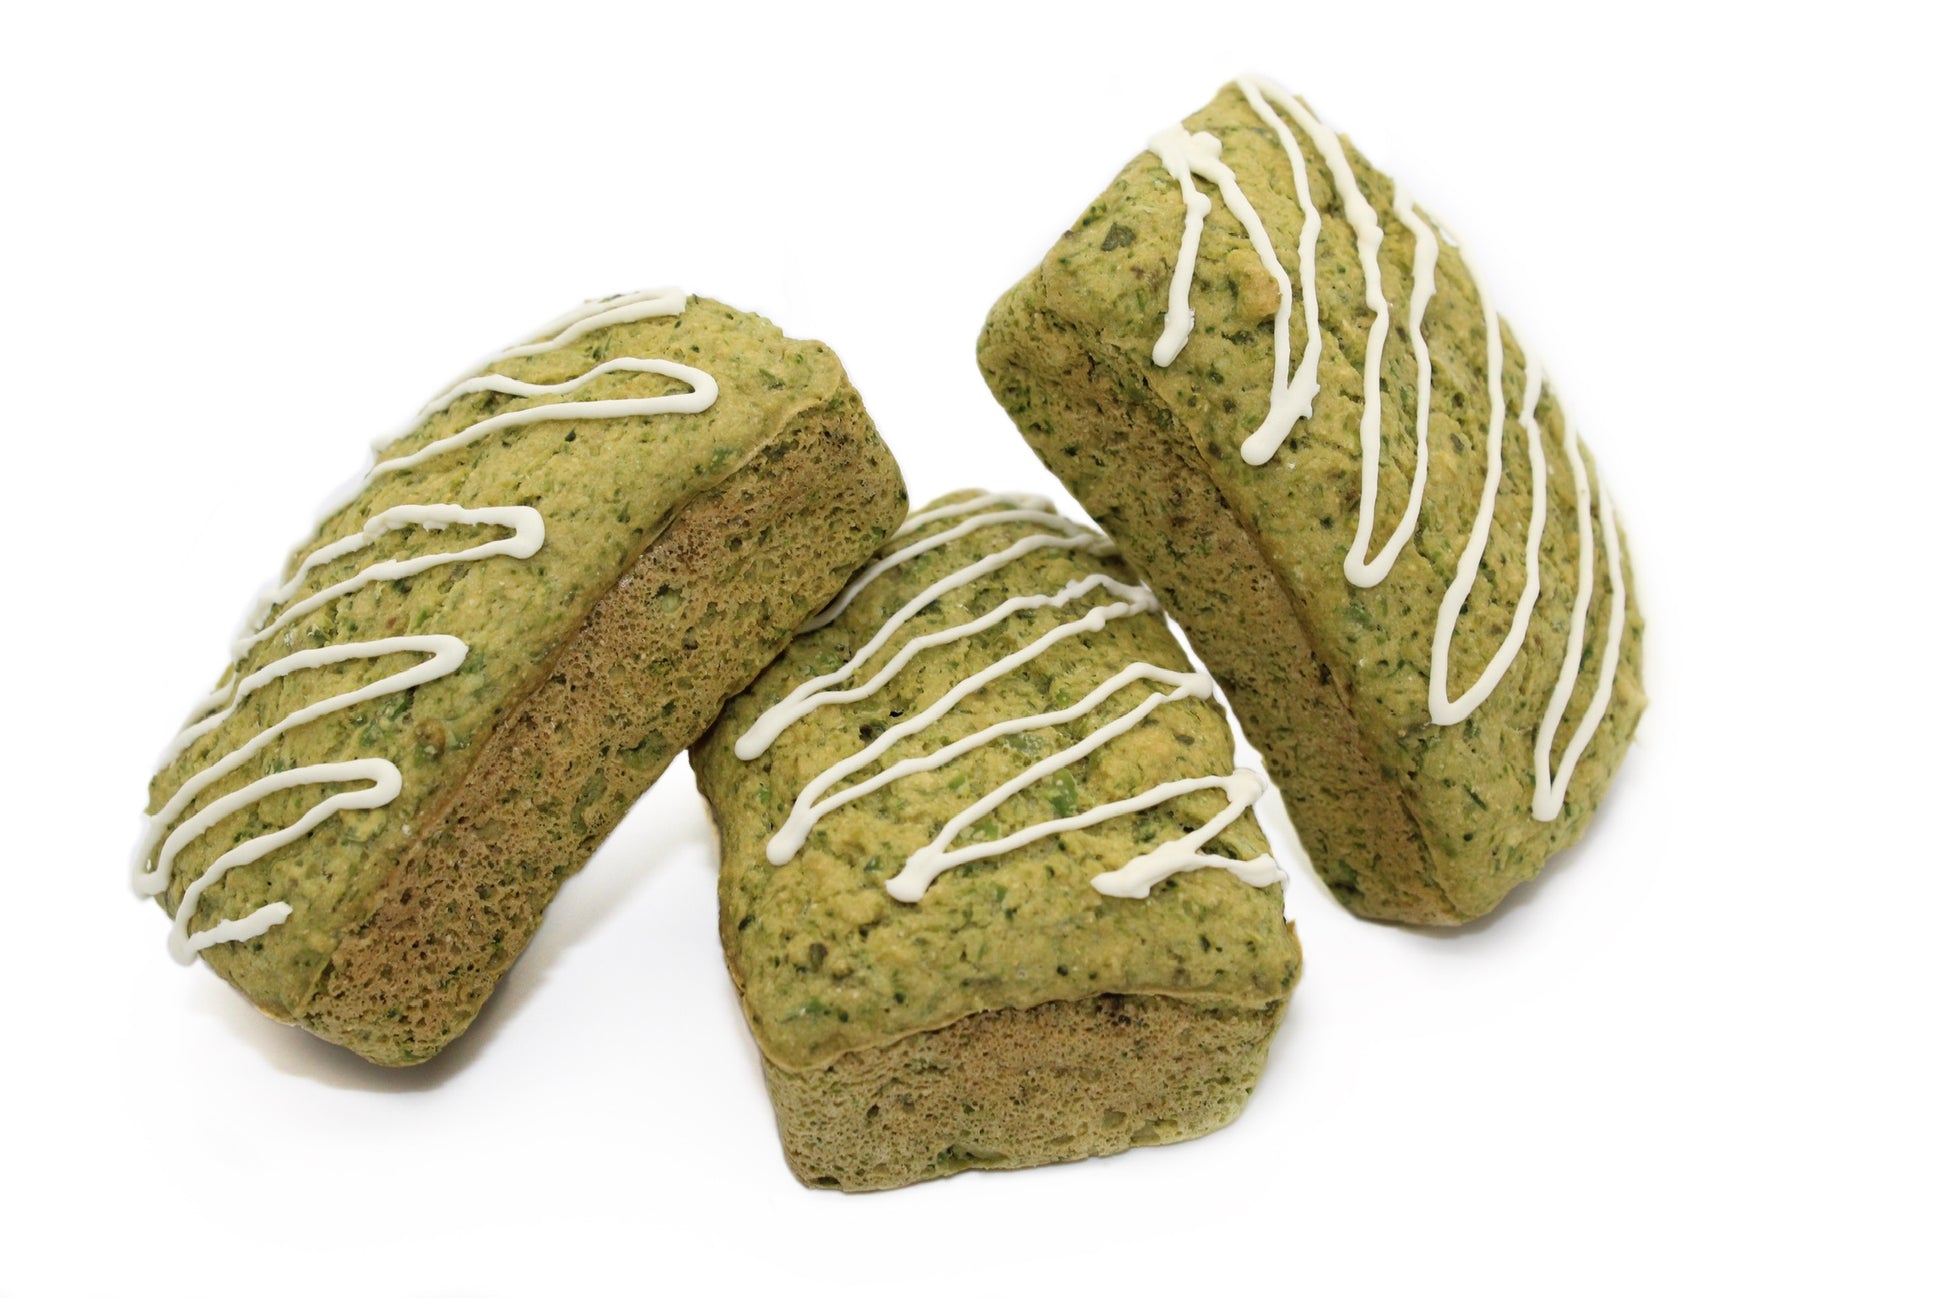 Three green Broccoli and peas loaves with white drizzle frosting.